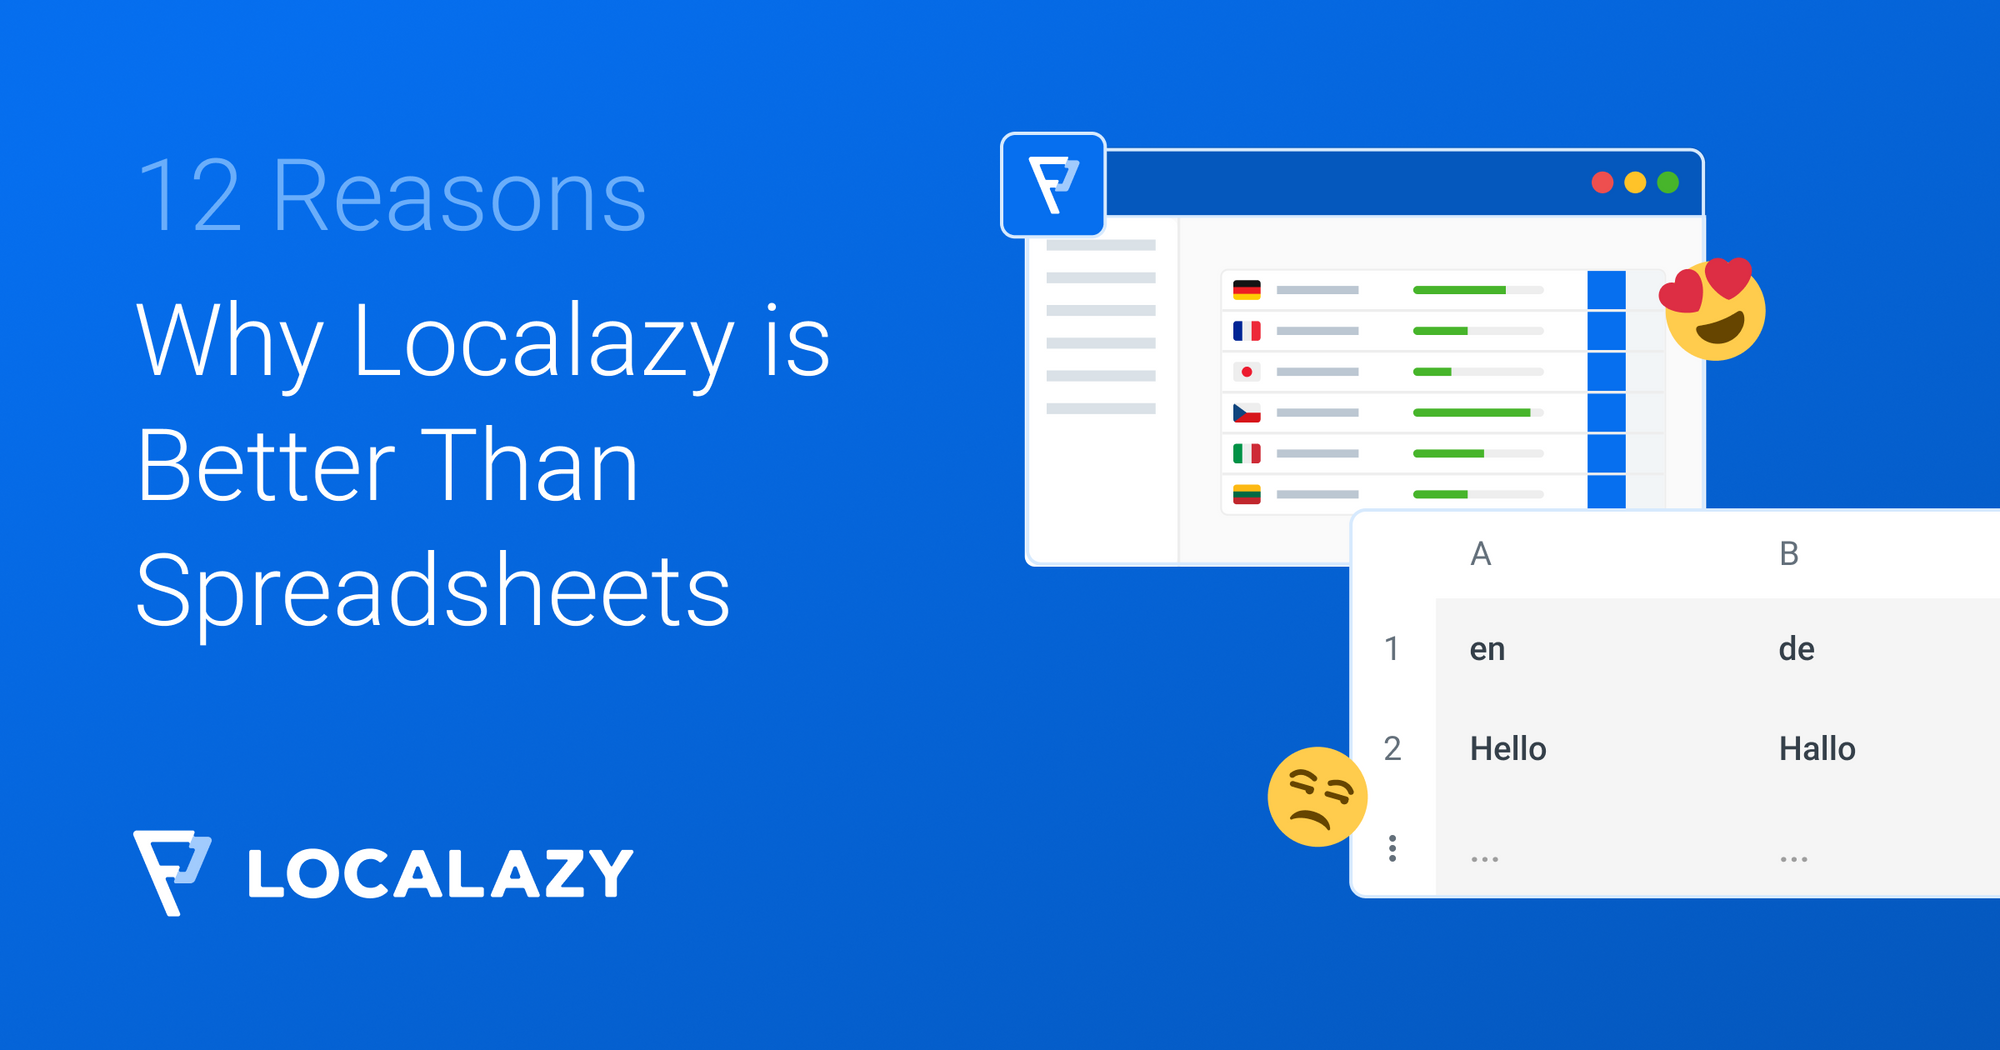 12 Reasons Why Localazy is Better Than Spreadsheets for Localization Projects